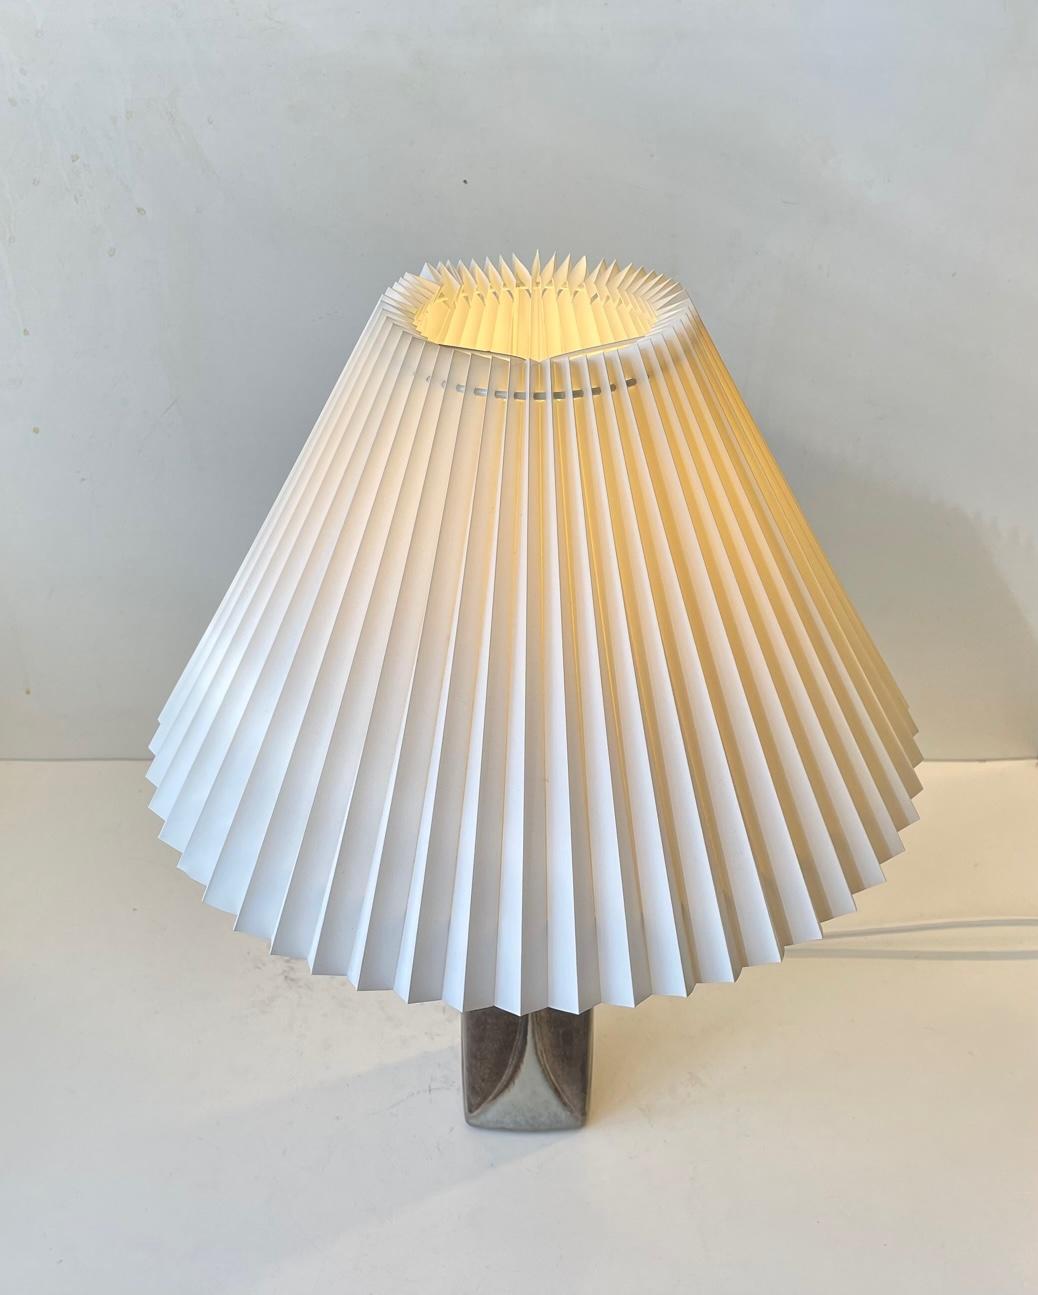 Table lamp designed by Marianne Starck for Michael Andersen & Son, Denmark. Decorated with glazed leaves in earthy tones. It features its original bakelite socket with pin on/of switch. The height of 18 inches (45 cm) is with shade. Its installed